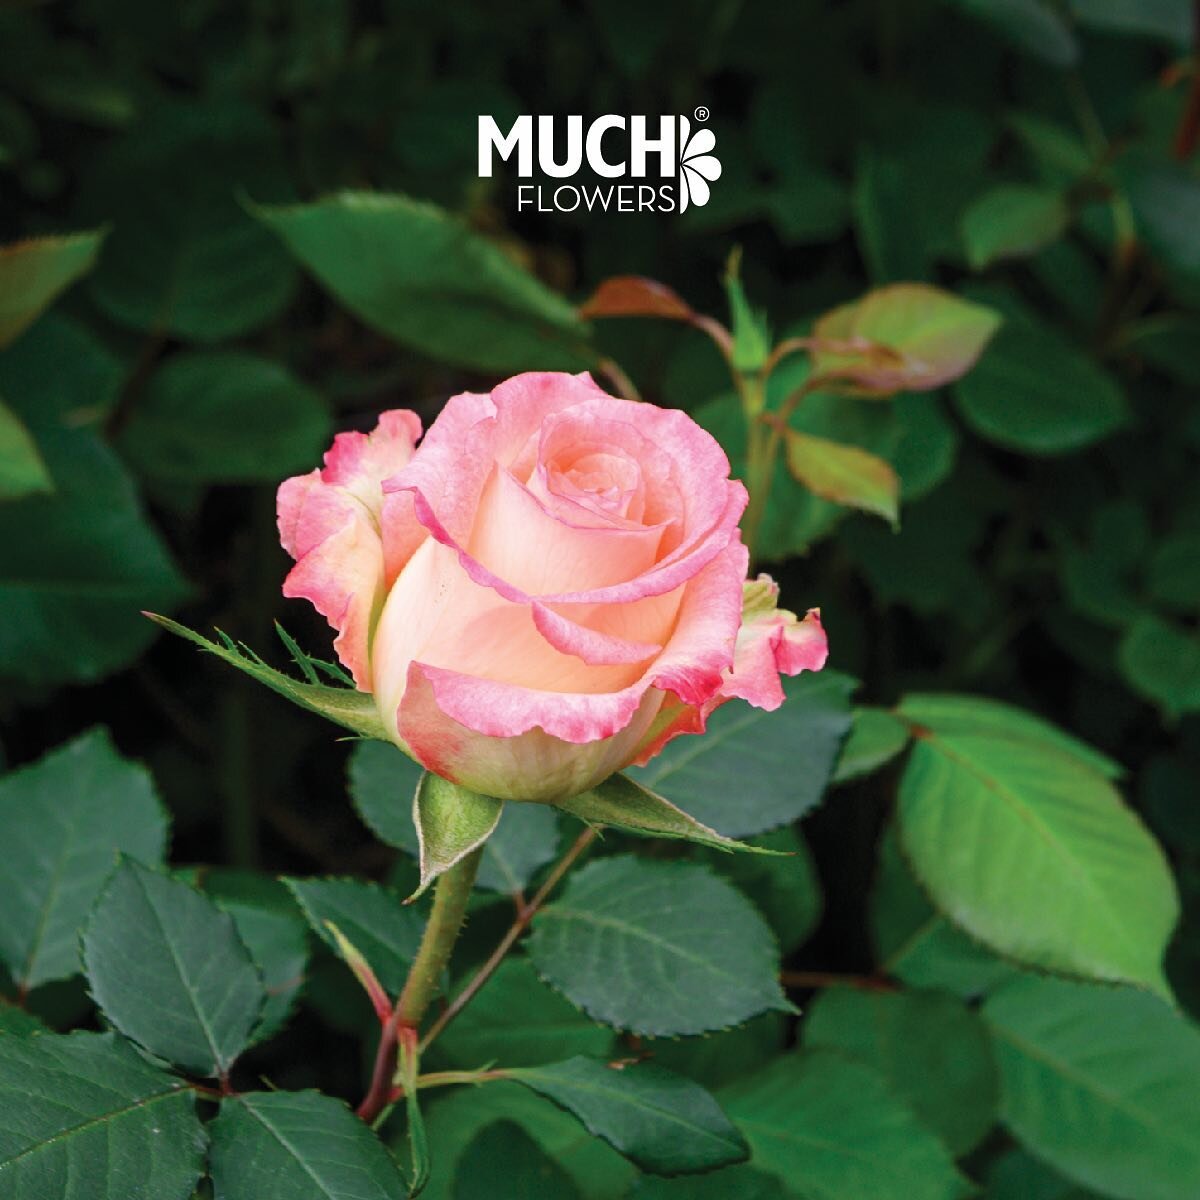 We dedicate our time to each flower blooming in our farms. Discover our wide selection of flowers visiting our website.
#muchflowers #muchbetter #topqualityflowers #flowerpower #bloominghope #muchteam #muchforall #fairtradecertified #rainforestallian